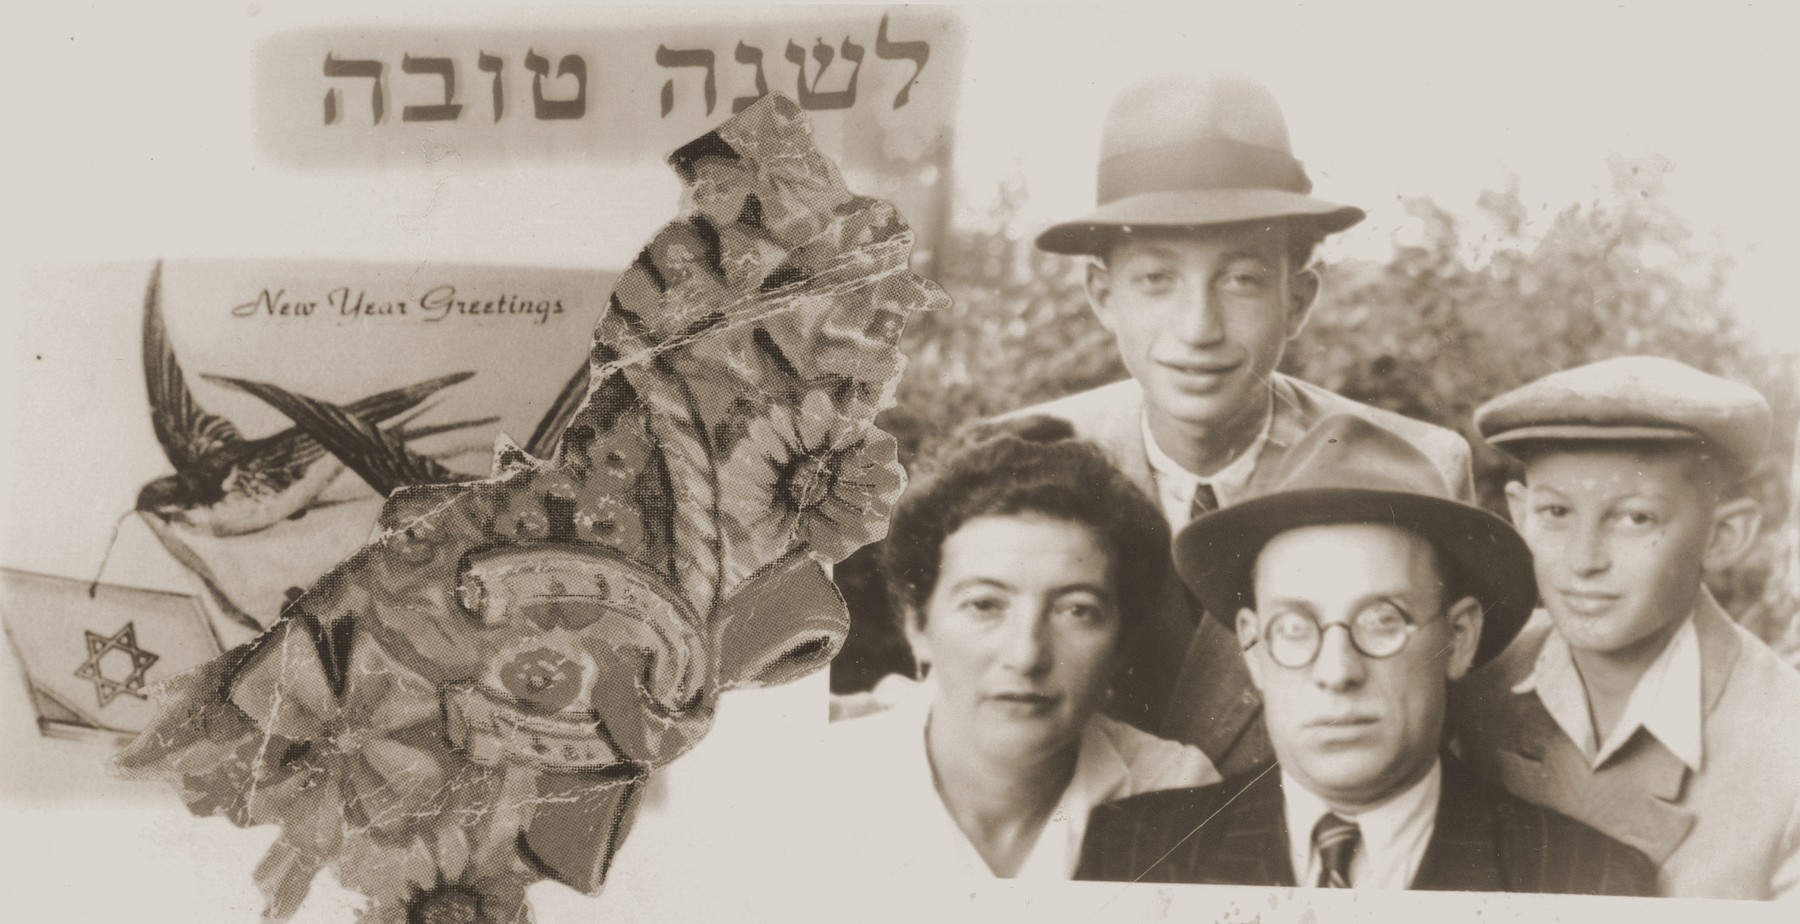 Personalized Jewish New Year's card with a portrait of the Appelbaum family in the Gabersee displaced persons camp.

Pictured are Gittel Chibowsky and Chanania Appelbaum with their two sons, Yitzhak (top) and Motel (right).